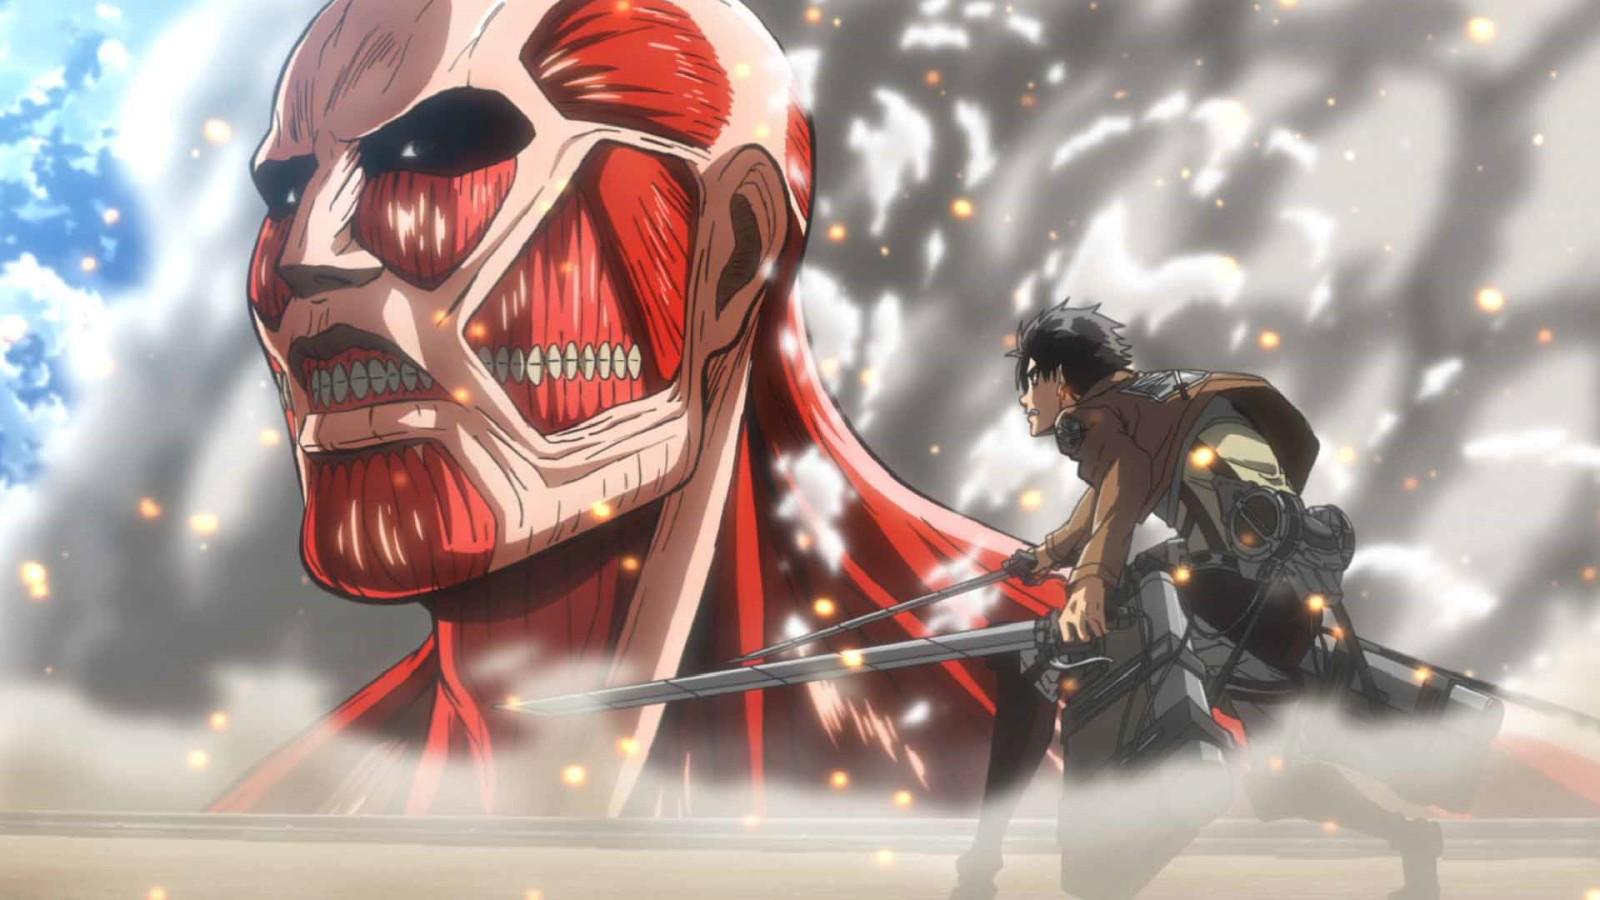 Eren Yeager and the Colossal Titan